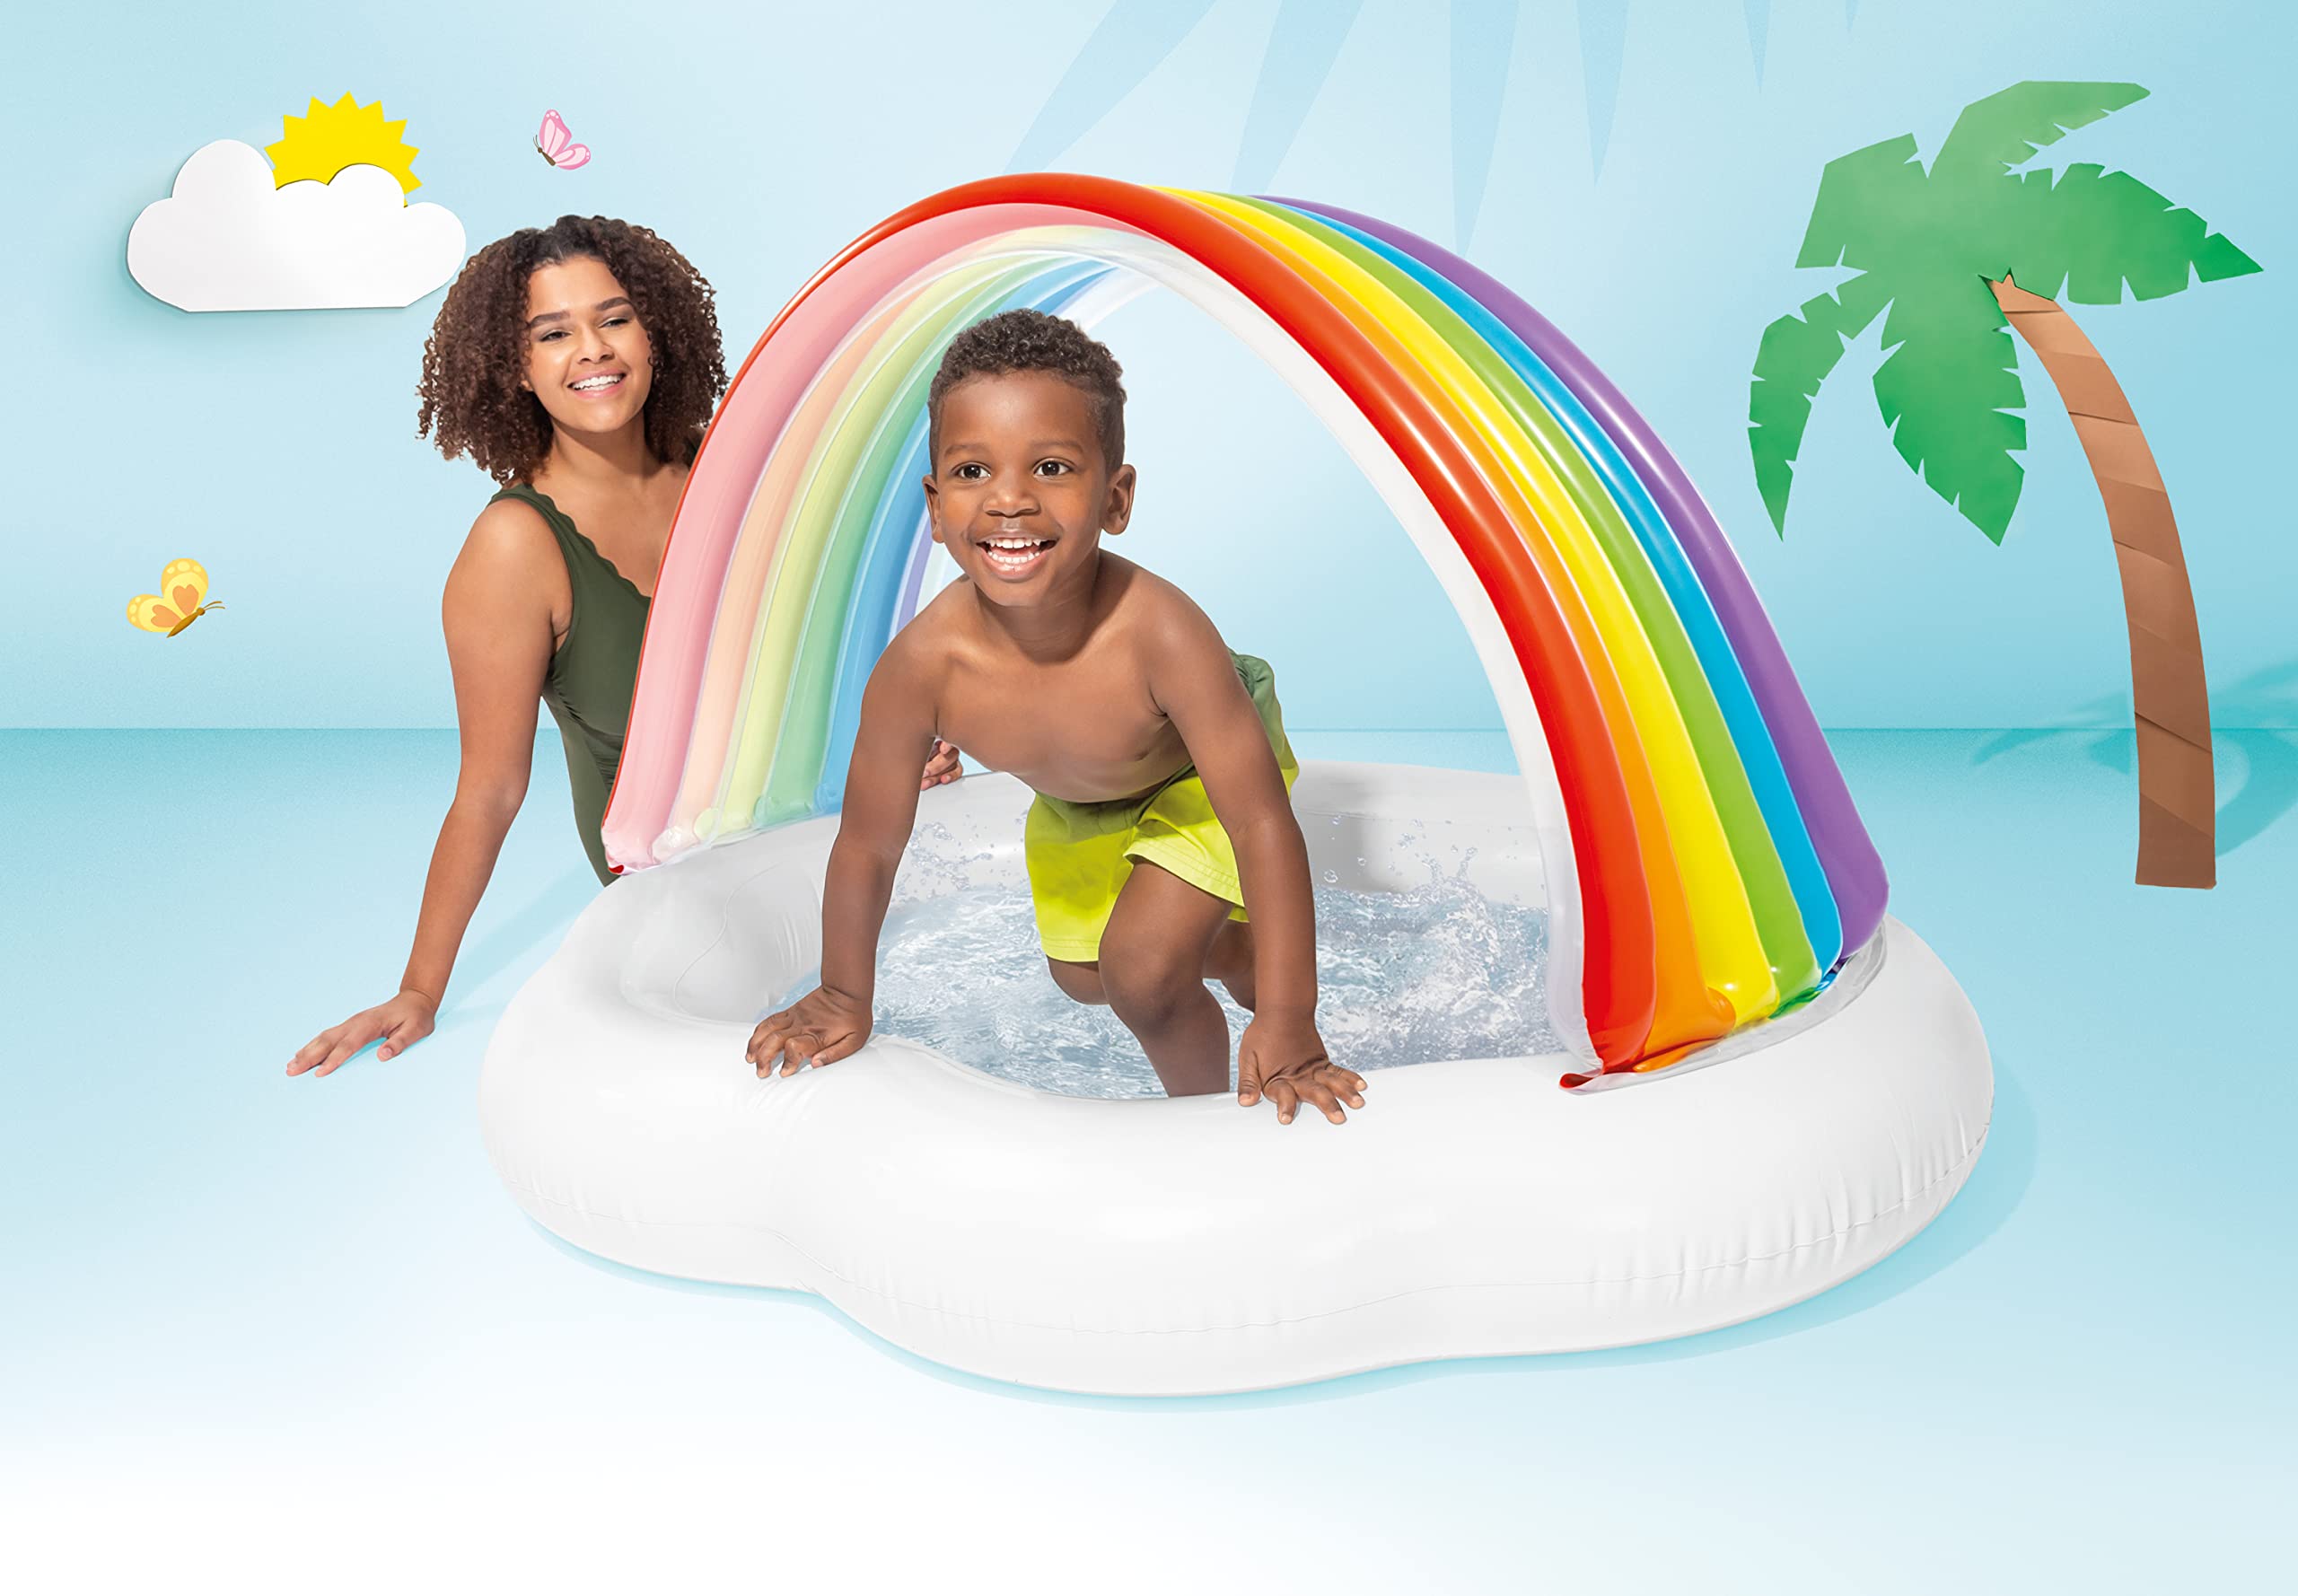 Intex Rainbow Cloud Inflatable Baby Pool, for Ages 1-3  - Like New